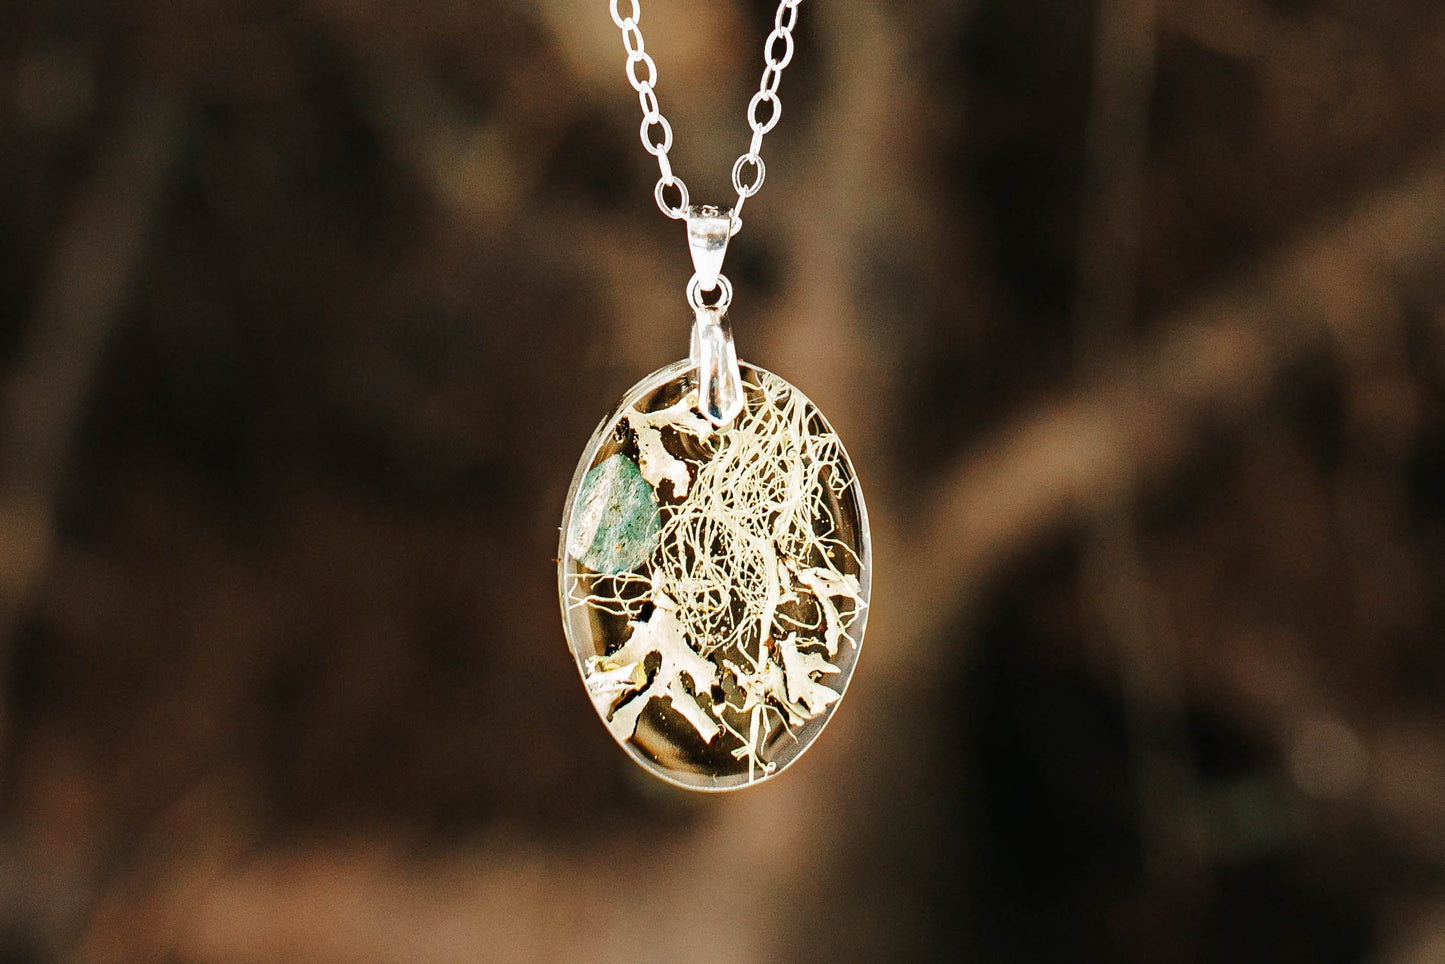 The Barrens Necklace